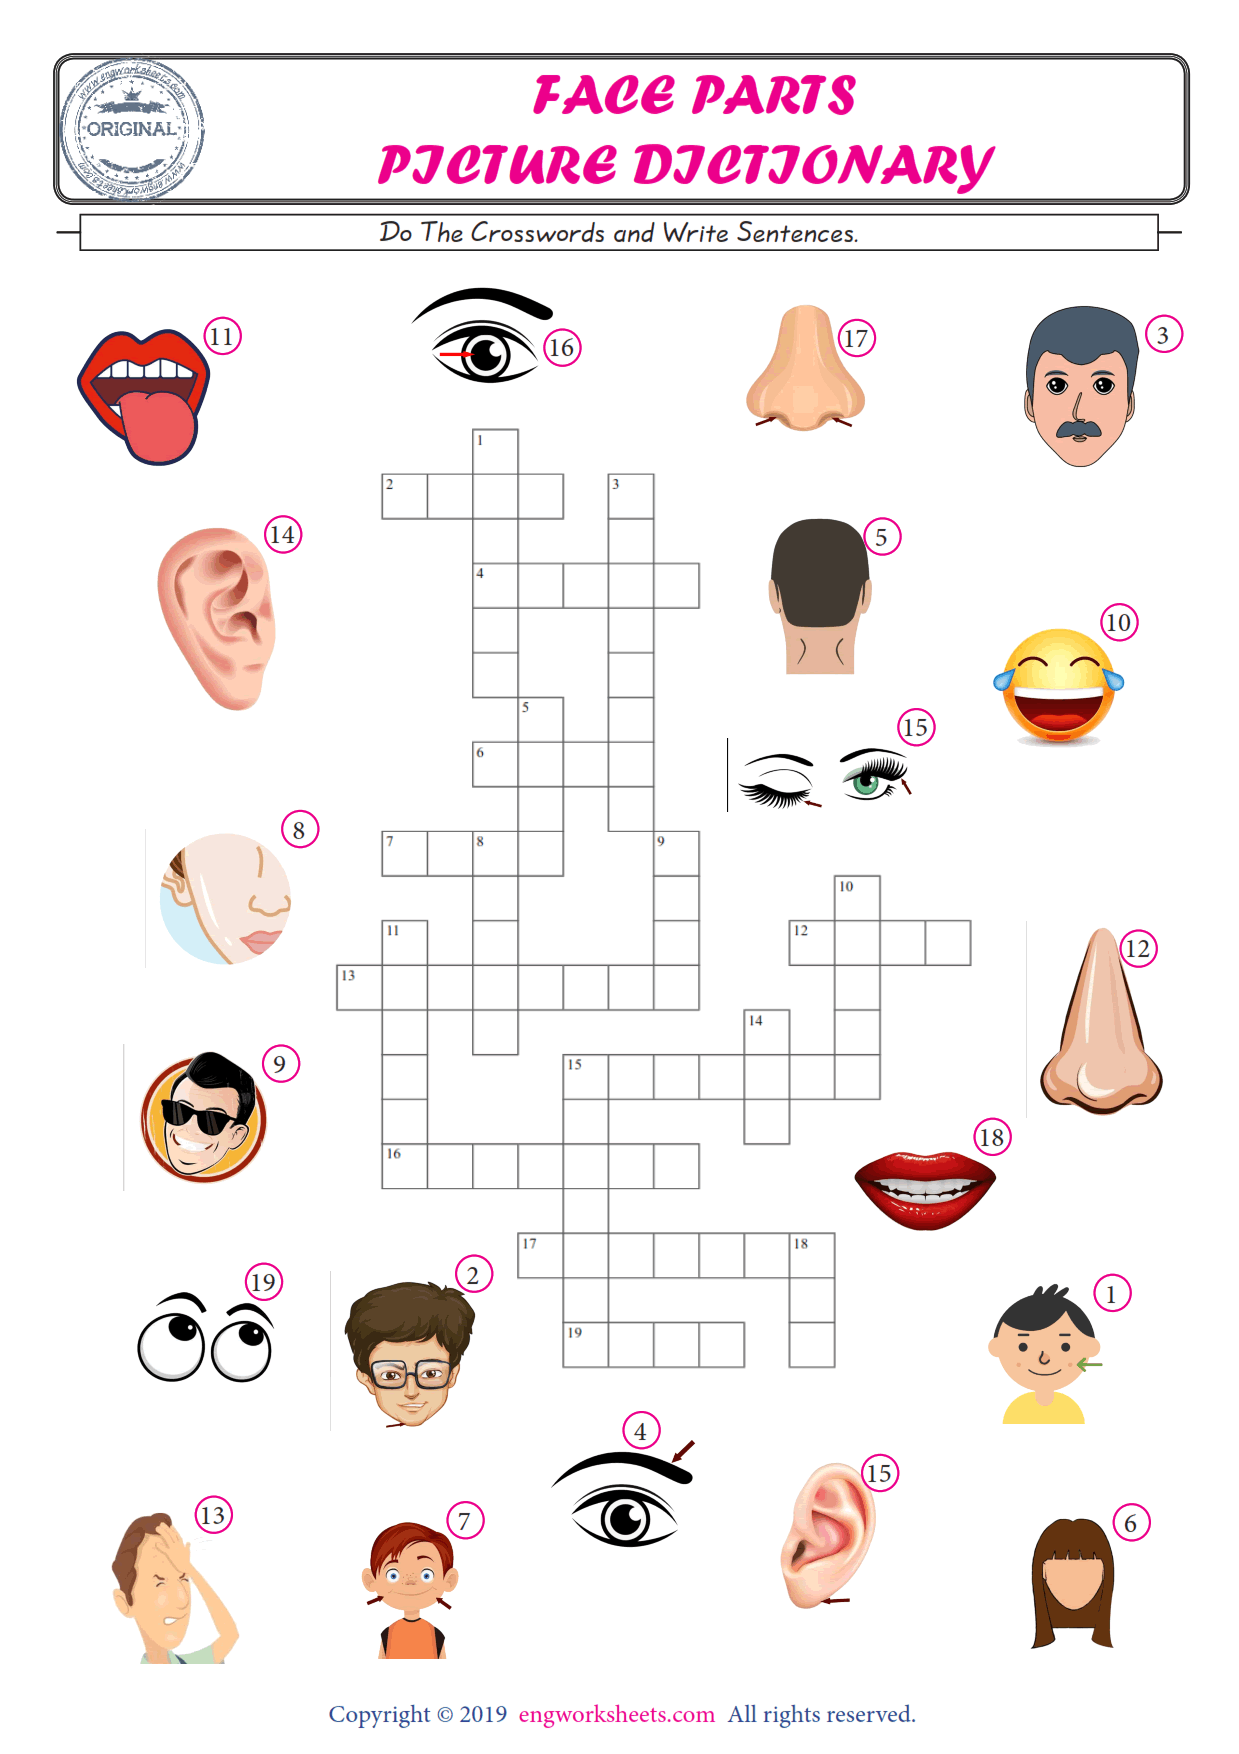  ESL printable worksheet for kids, supply the missing words of the crossword by using the Face Parts picture. 